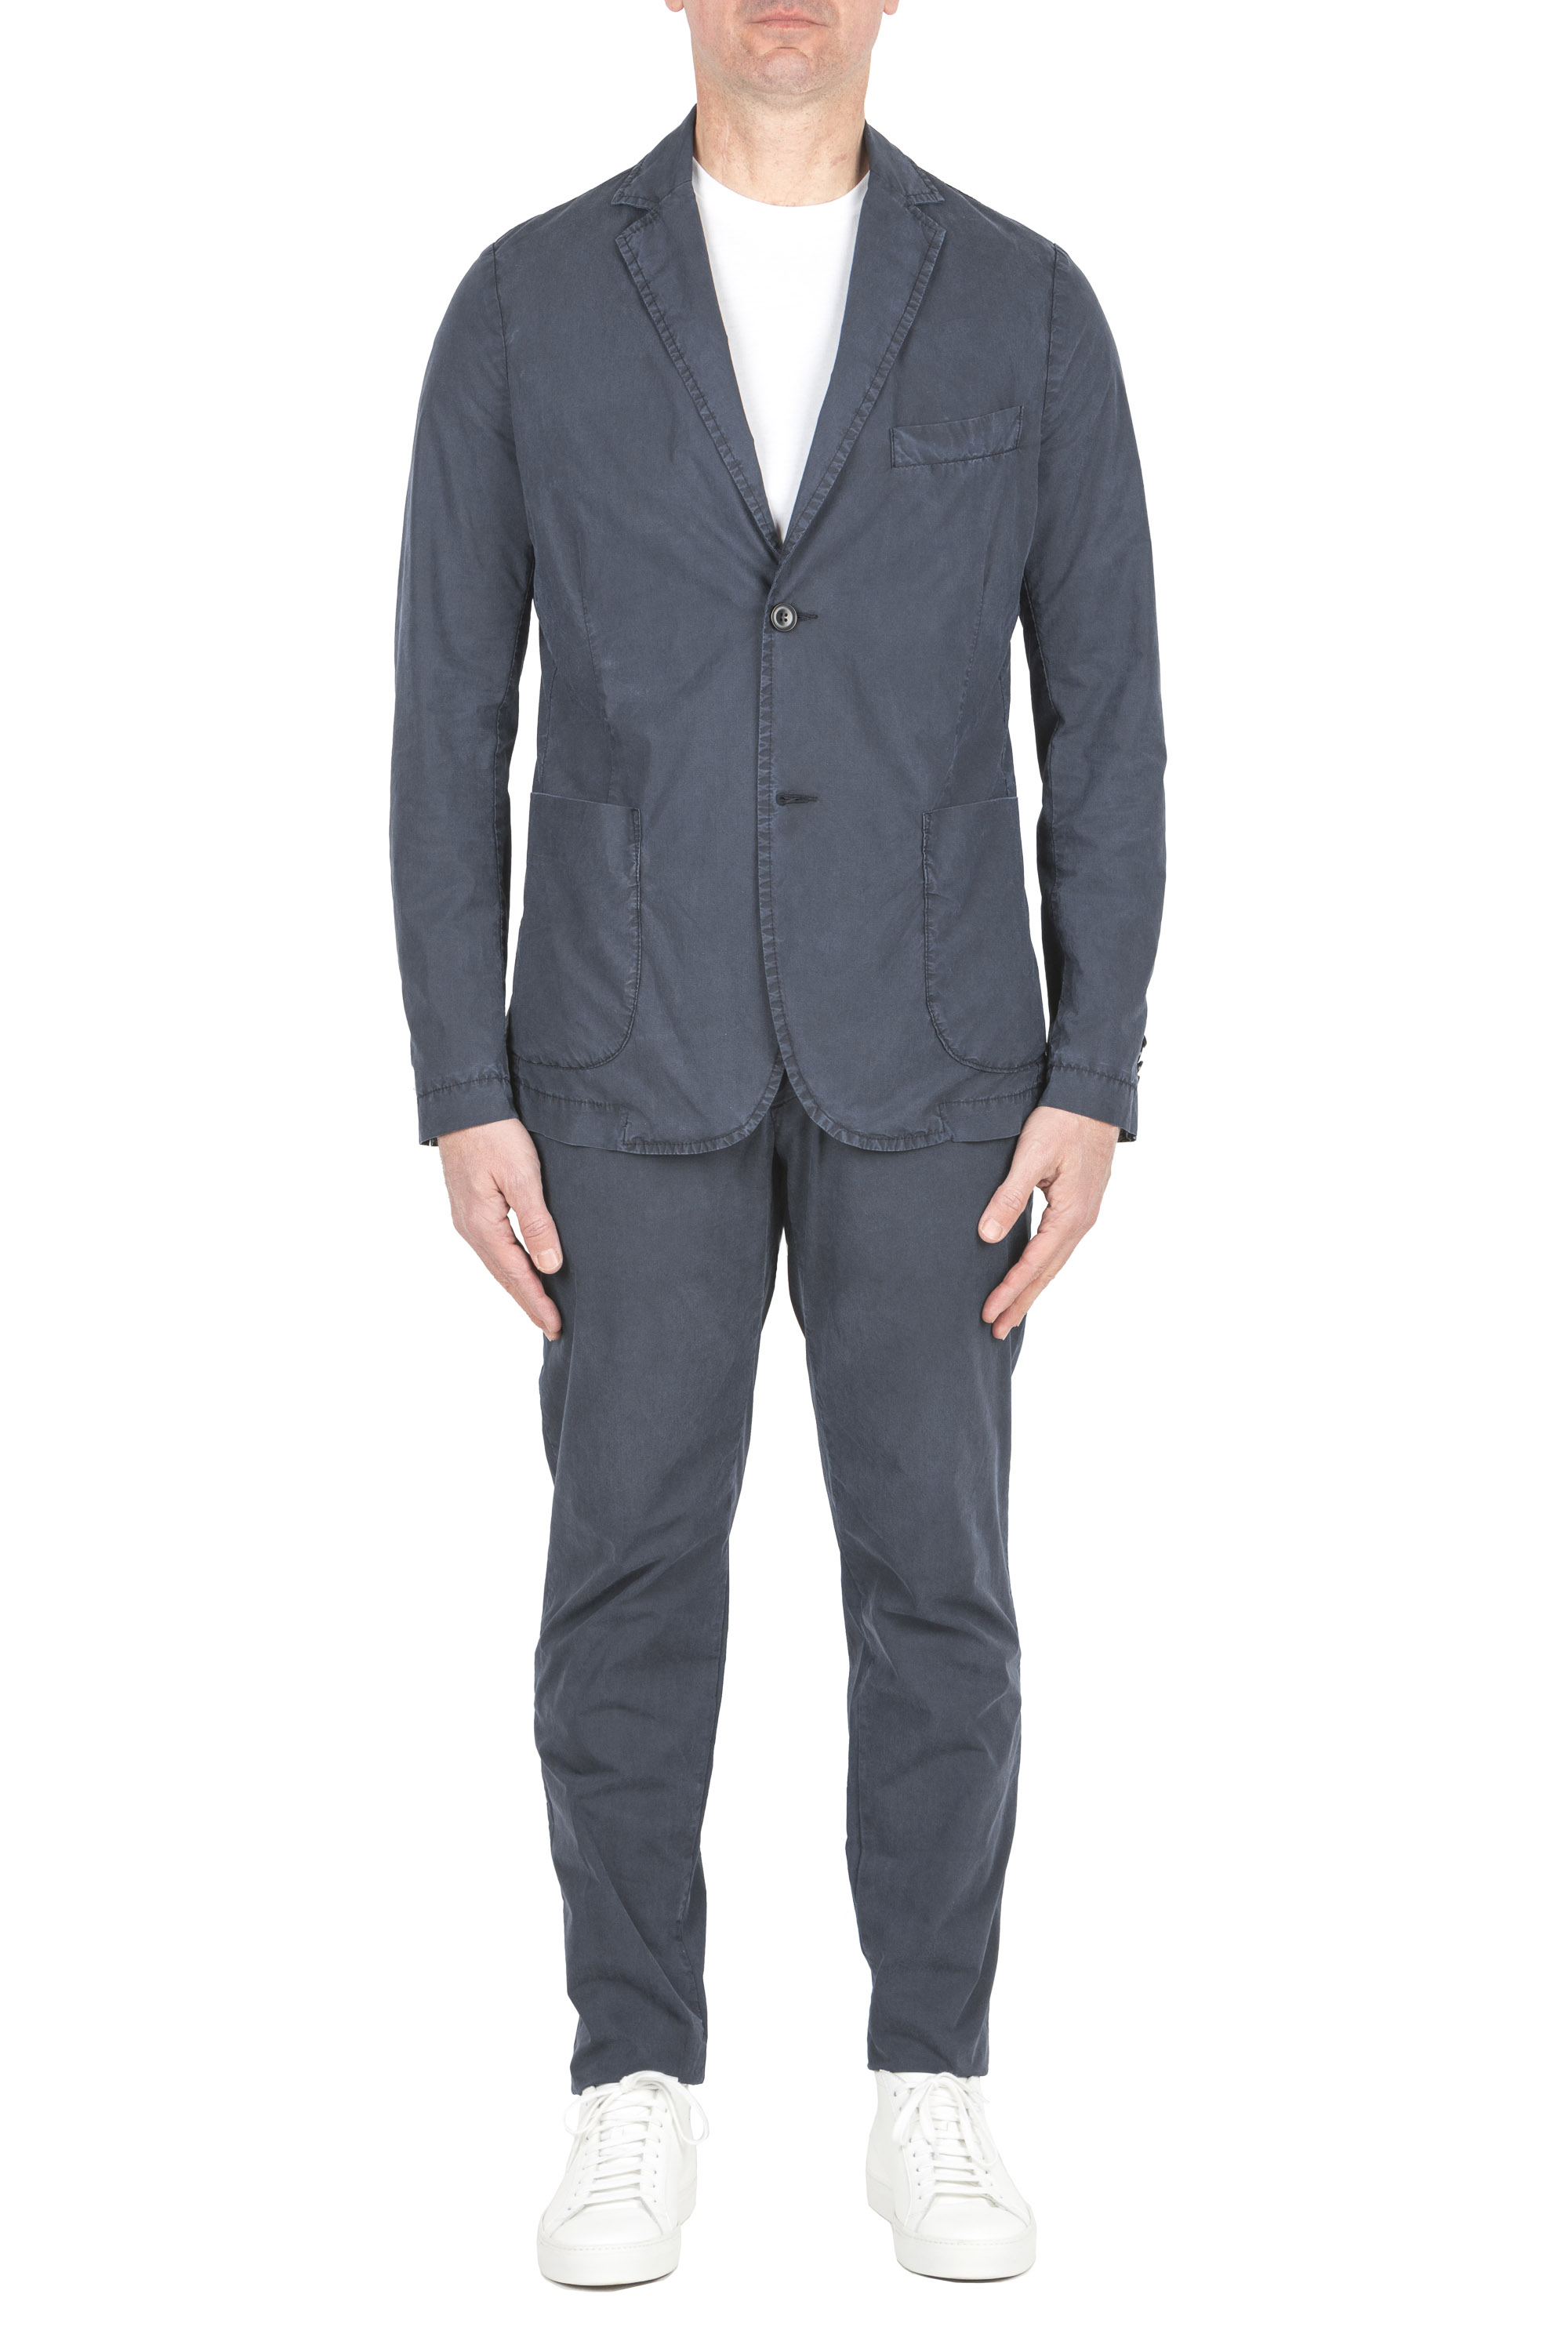 SBU Collection Summer 2022 Suits